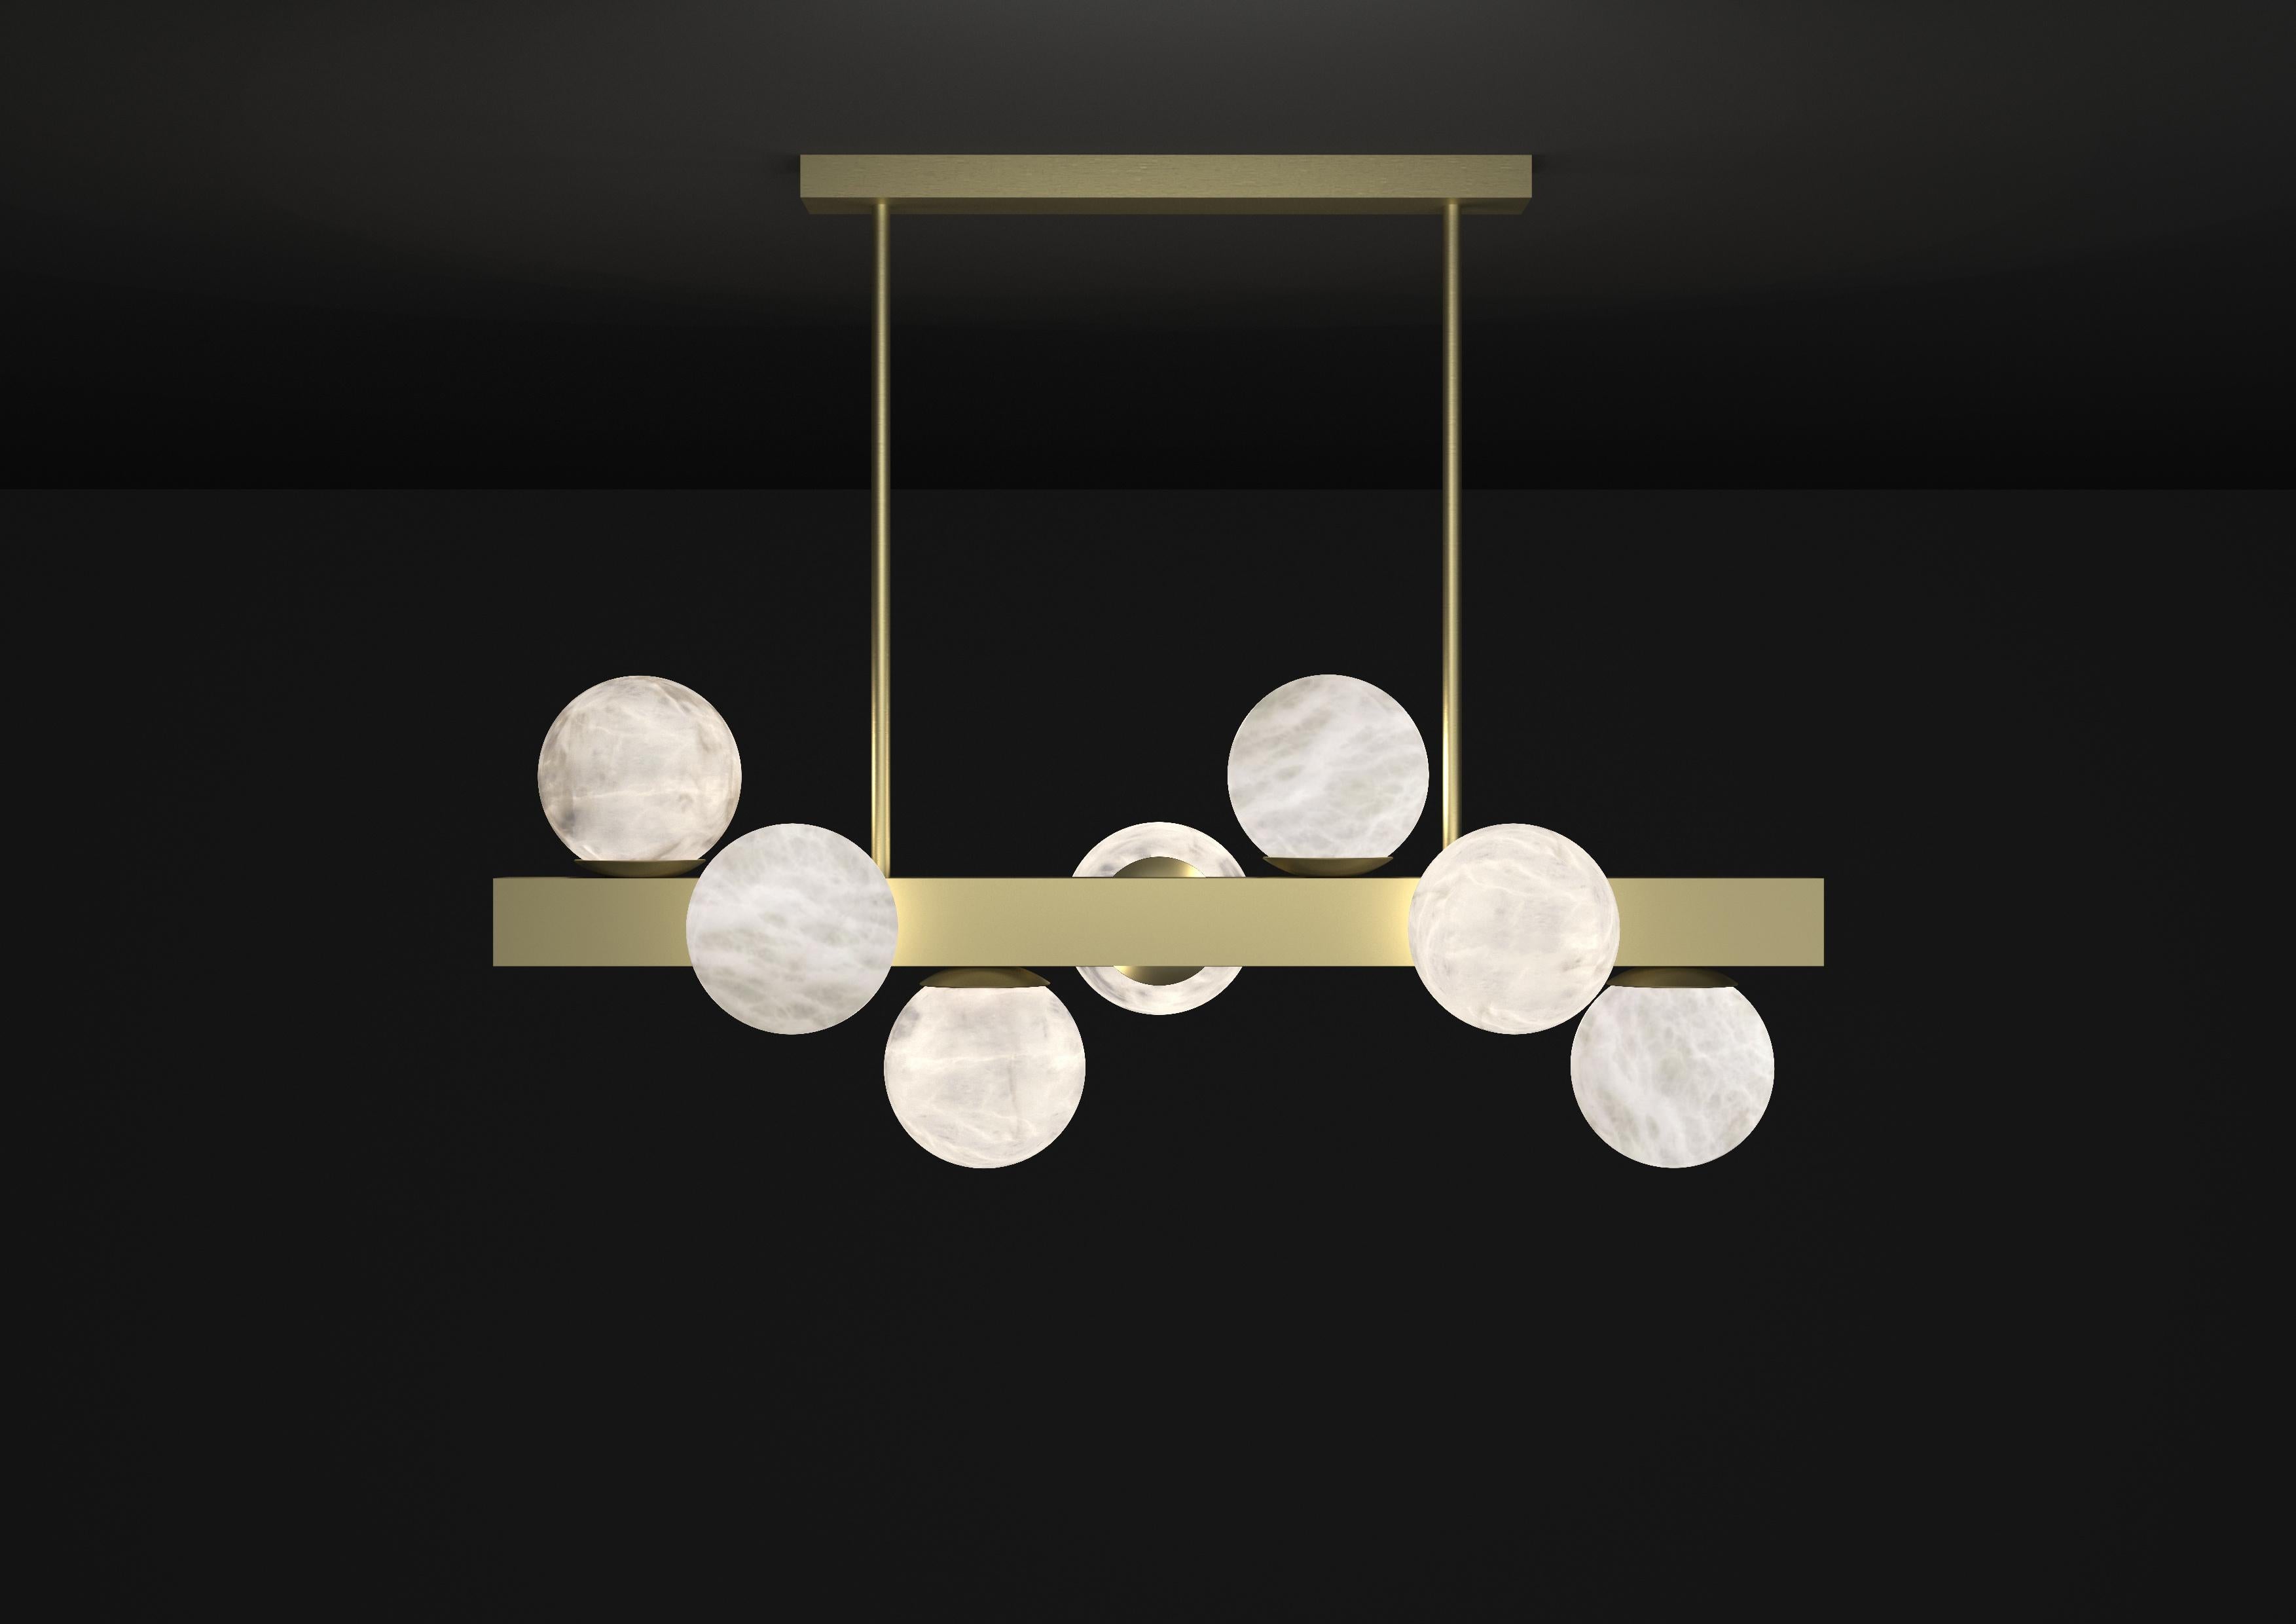 Dioniso Brushed Brass Pendant Lamp by Alabastro Italiano
Dimensions: D 35 x W 91 x H 36 cm.
Materials: White alabaster and brass.

Available in different finishes: Shiny Silver, Bronze, Brushed Brass, Ruggine of Florence, Brushed Burnished, Shiny